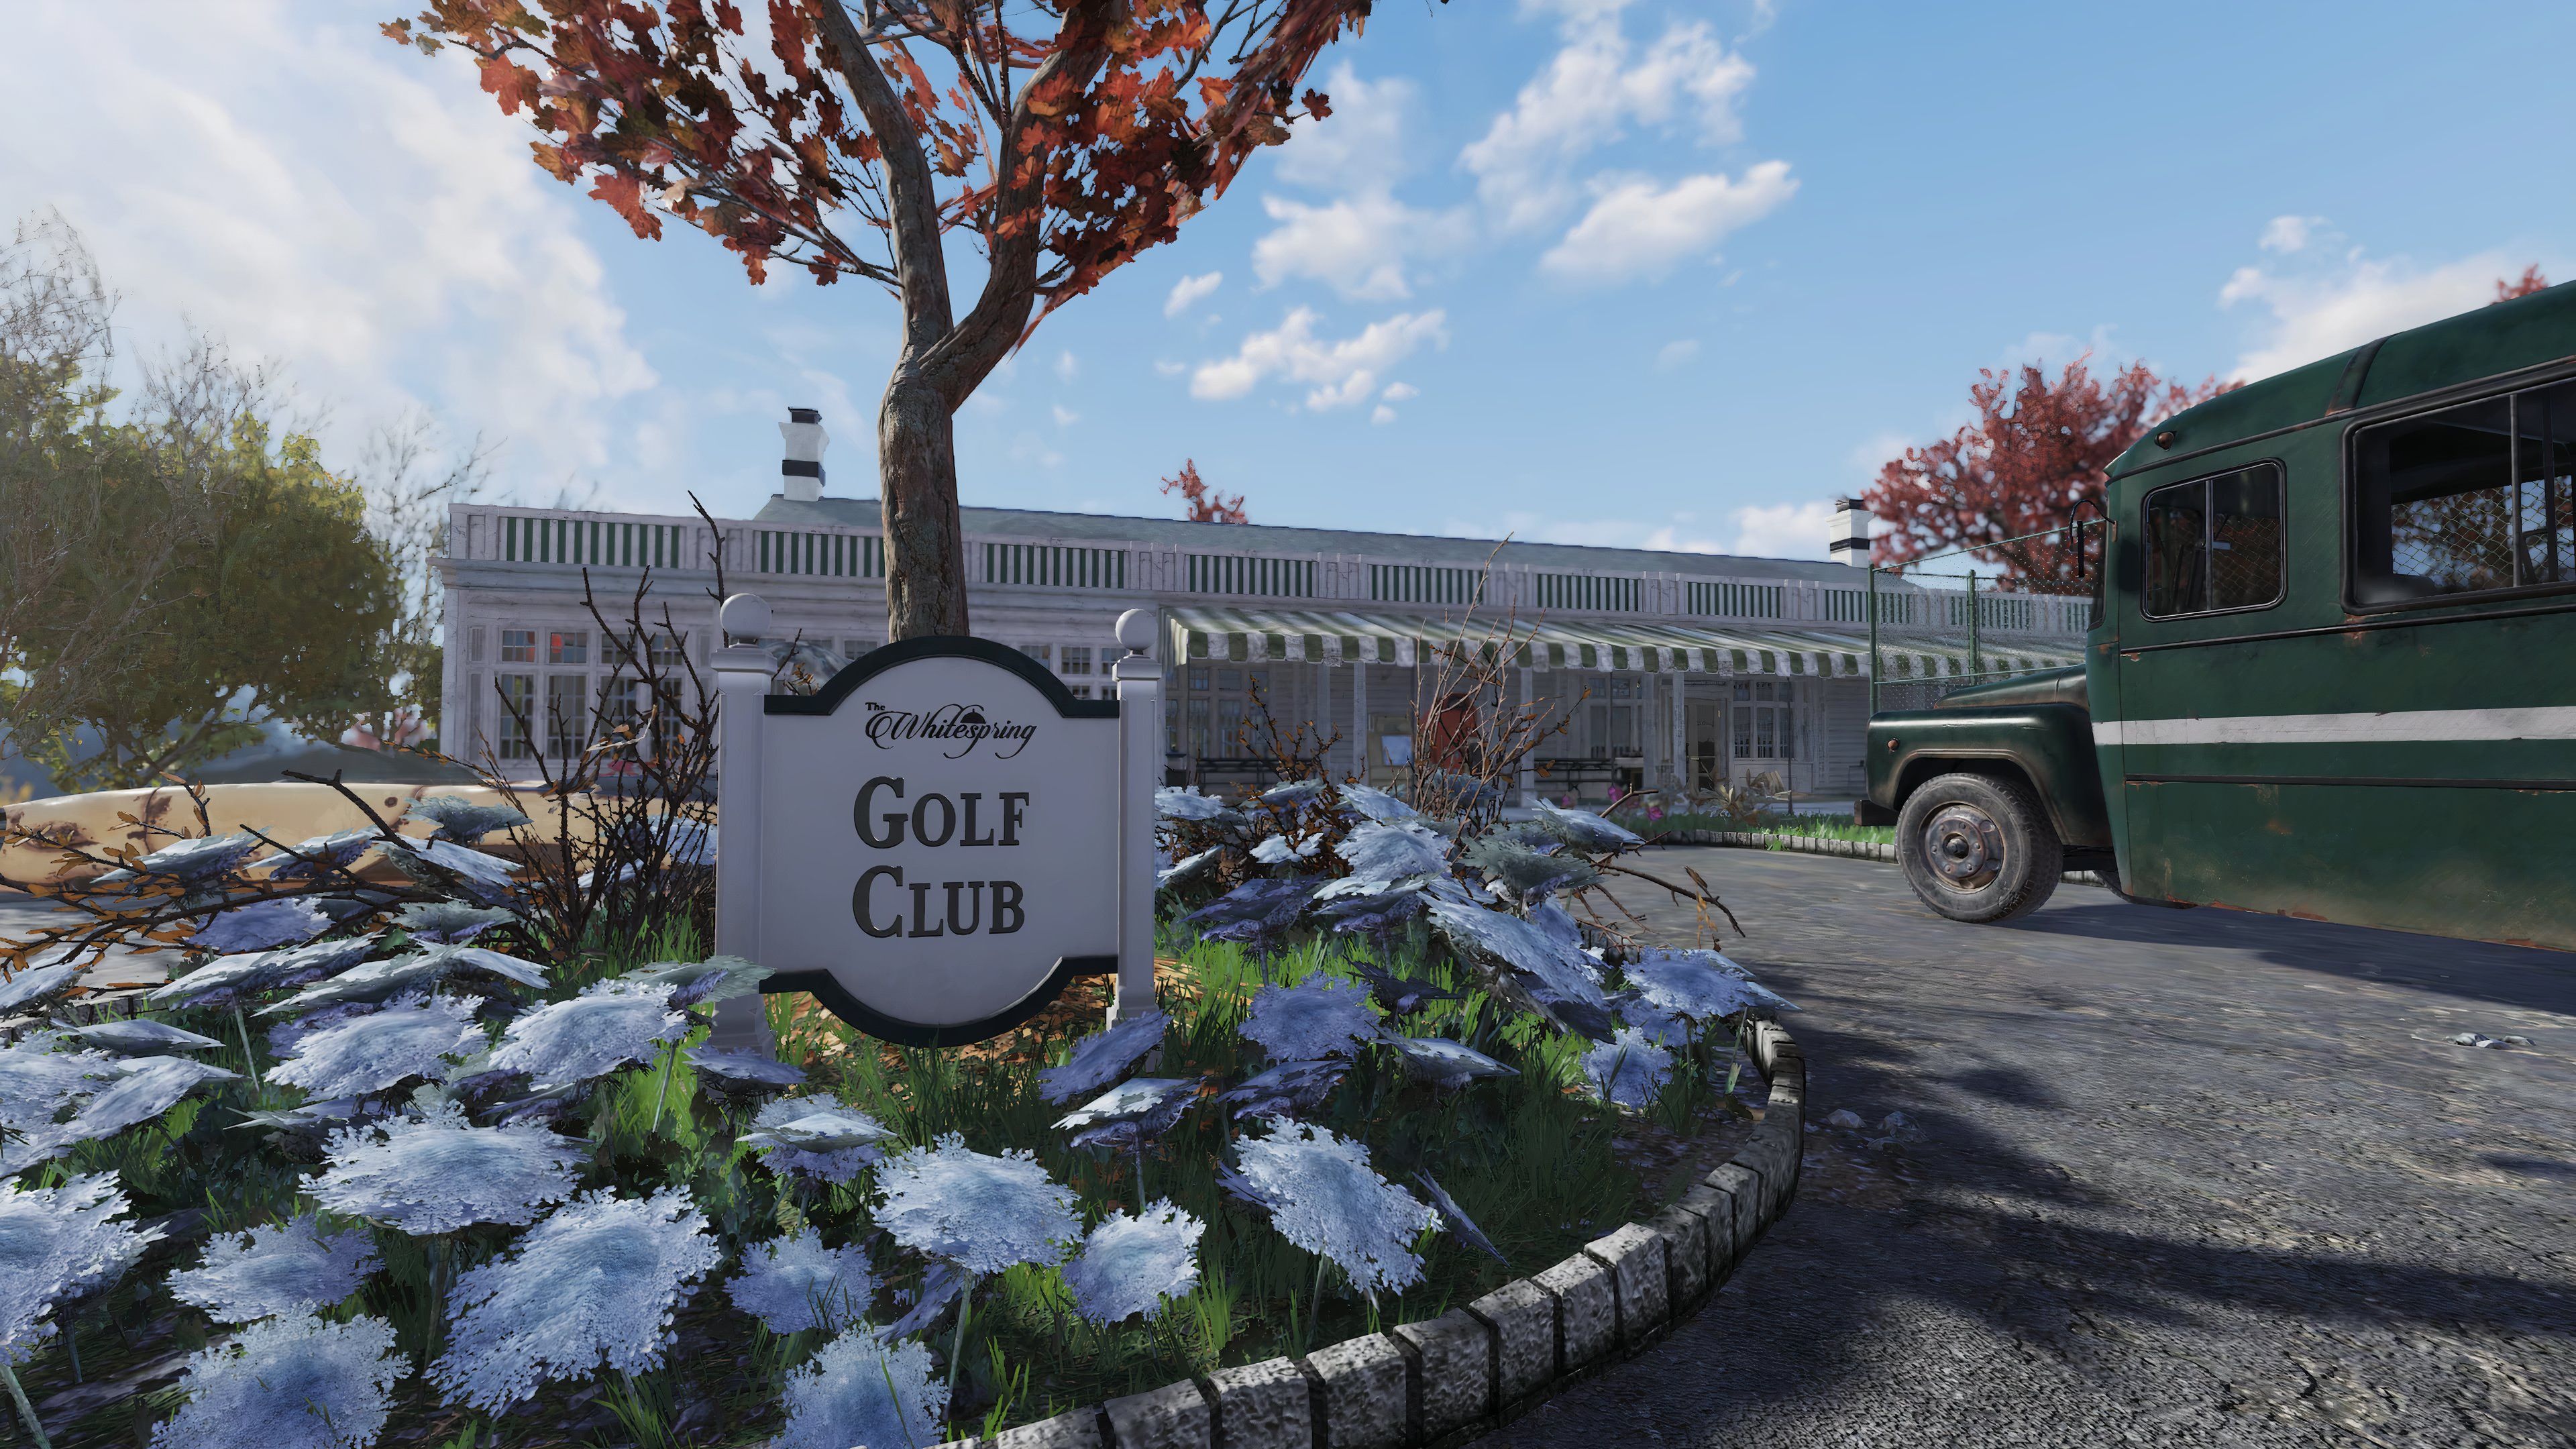 Whitesprings Golf Club in Fallout 76